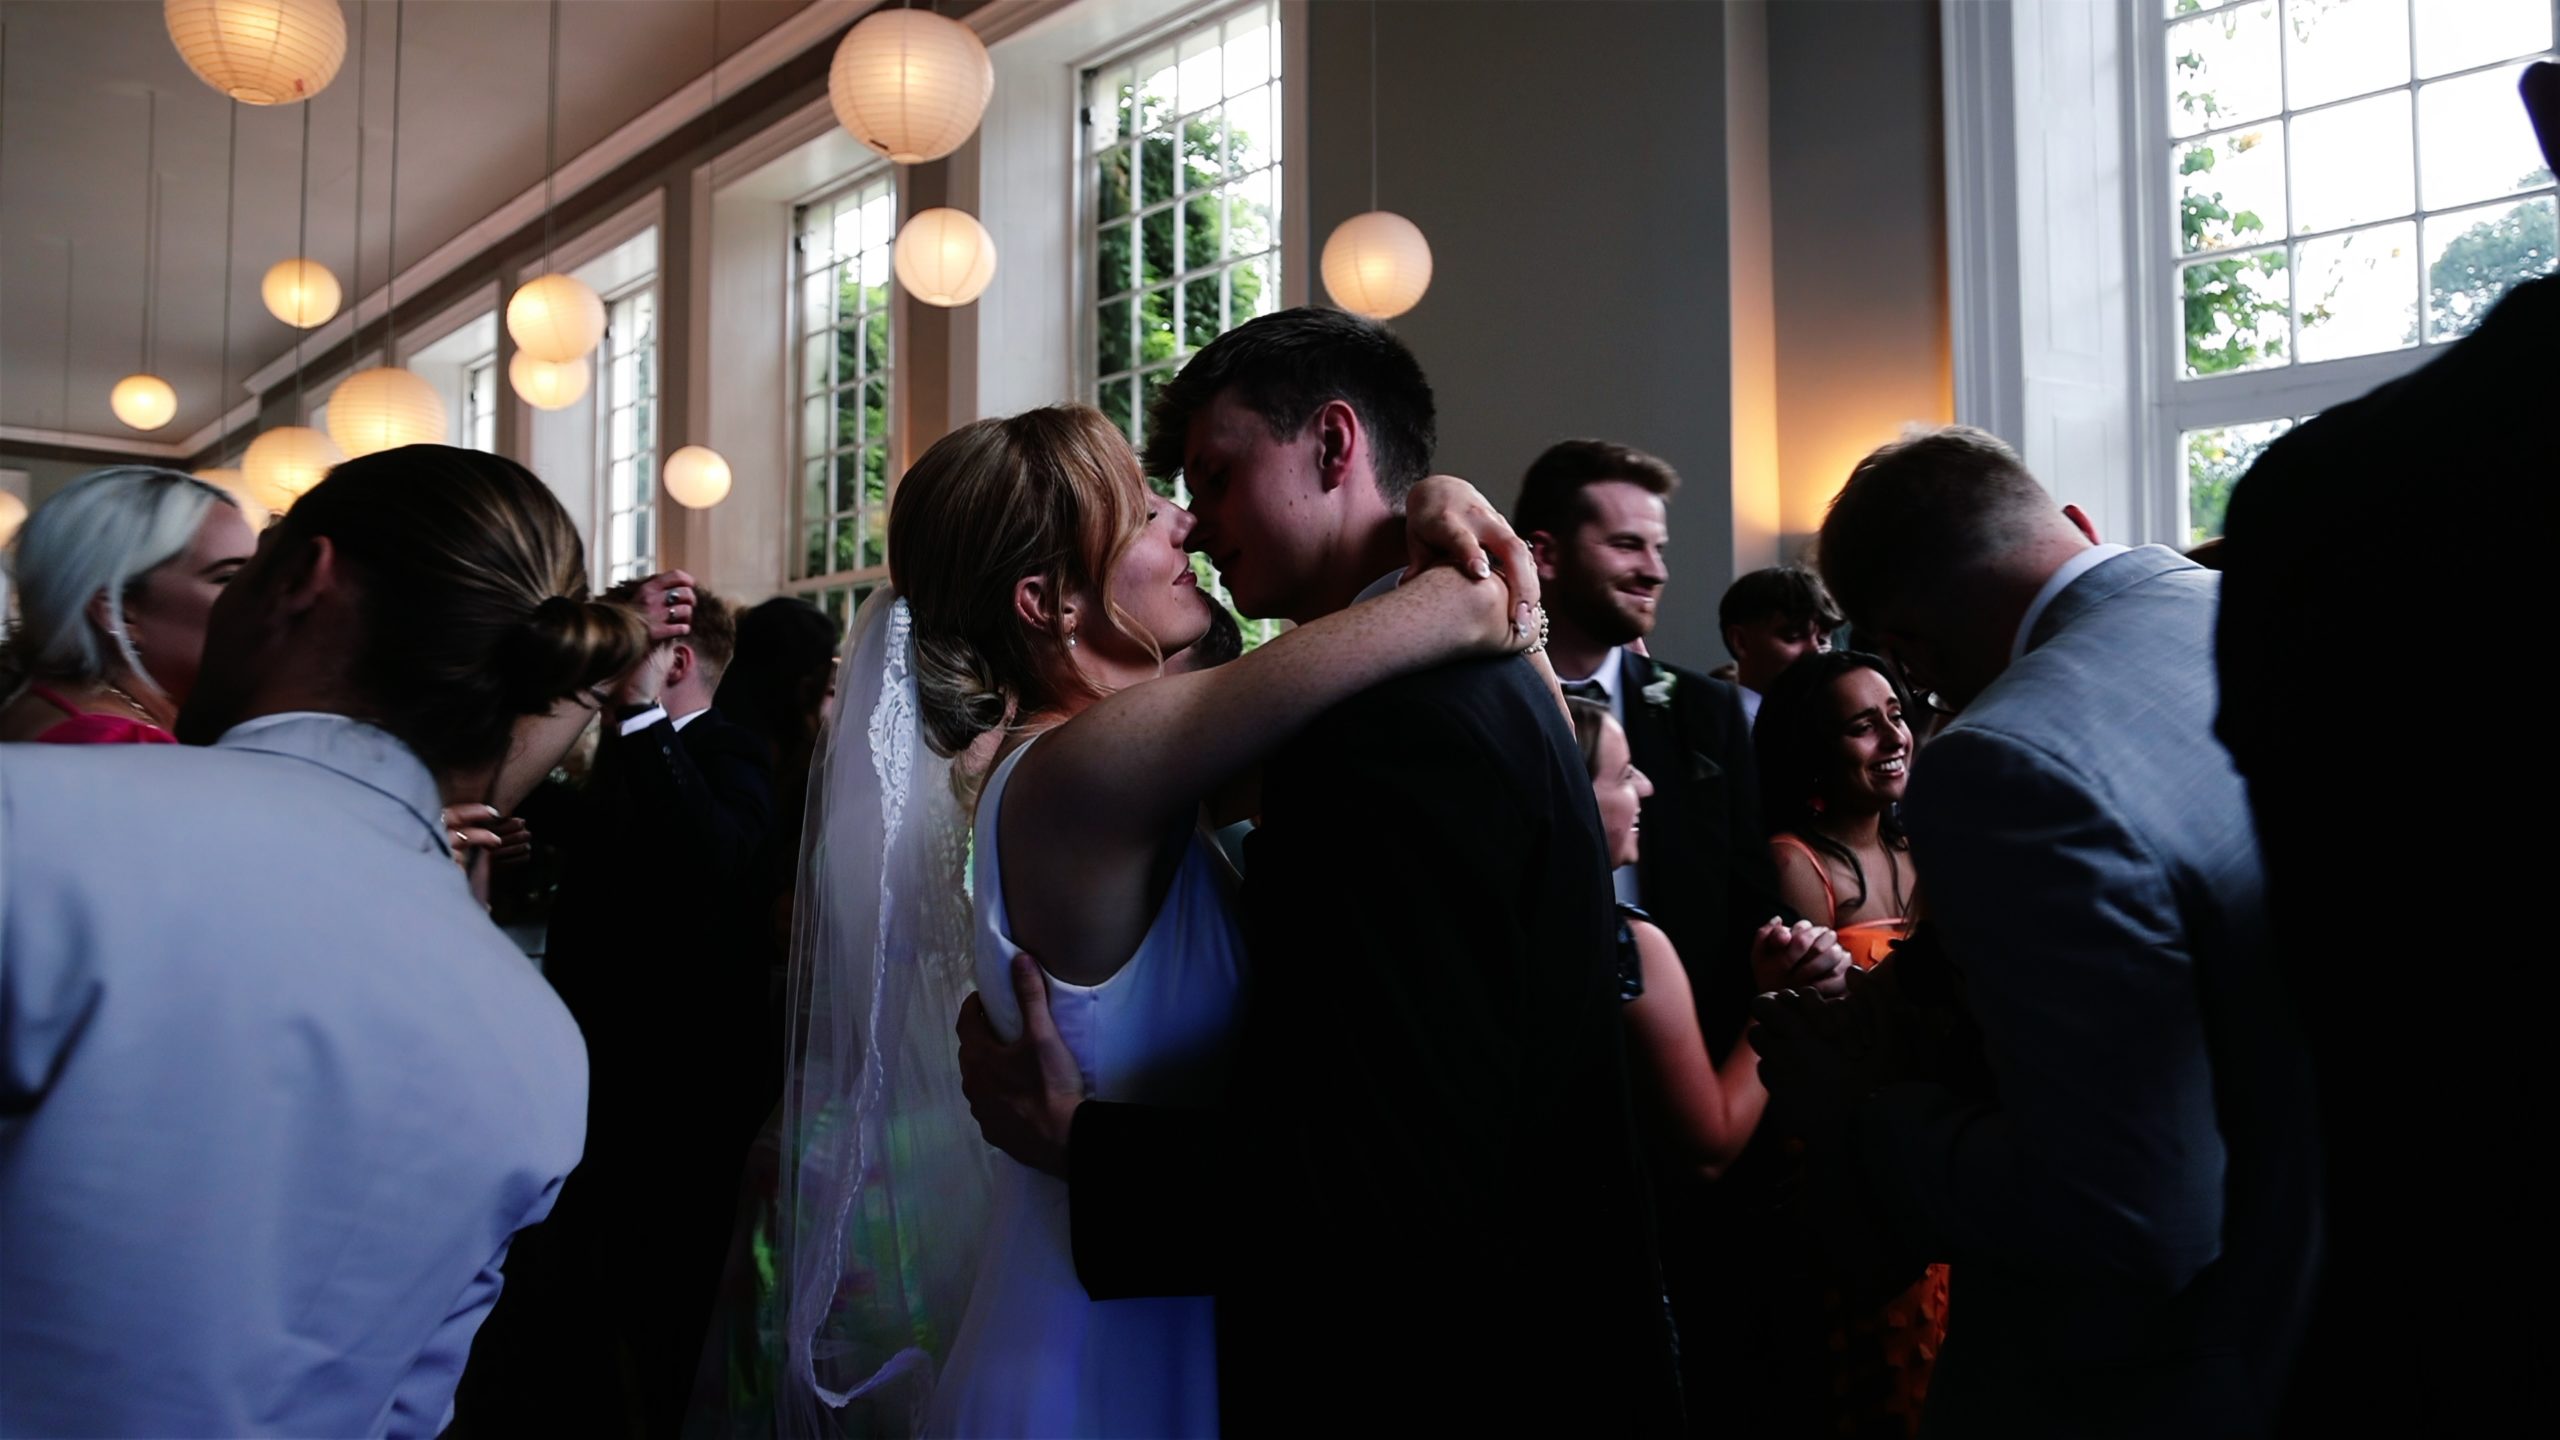 A wedding couple sharing a kiss during their first dance with guests around them